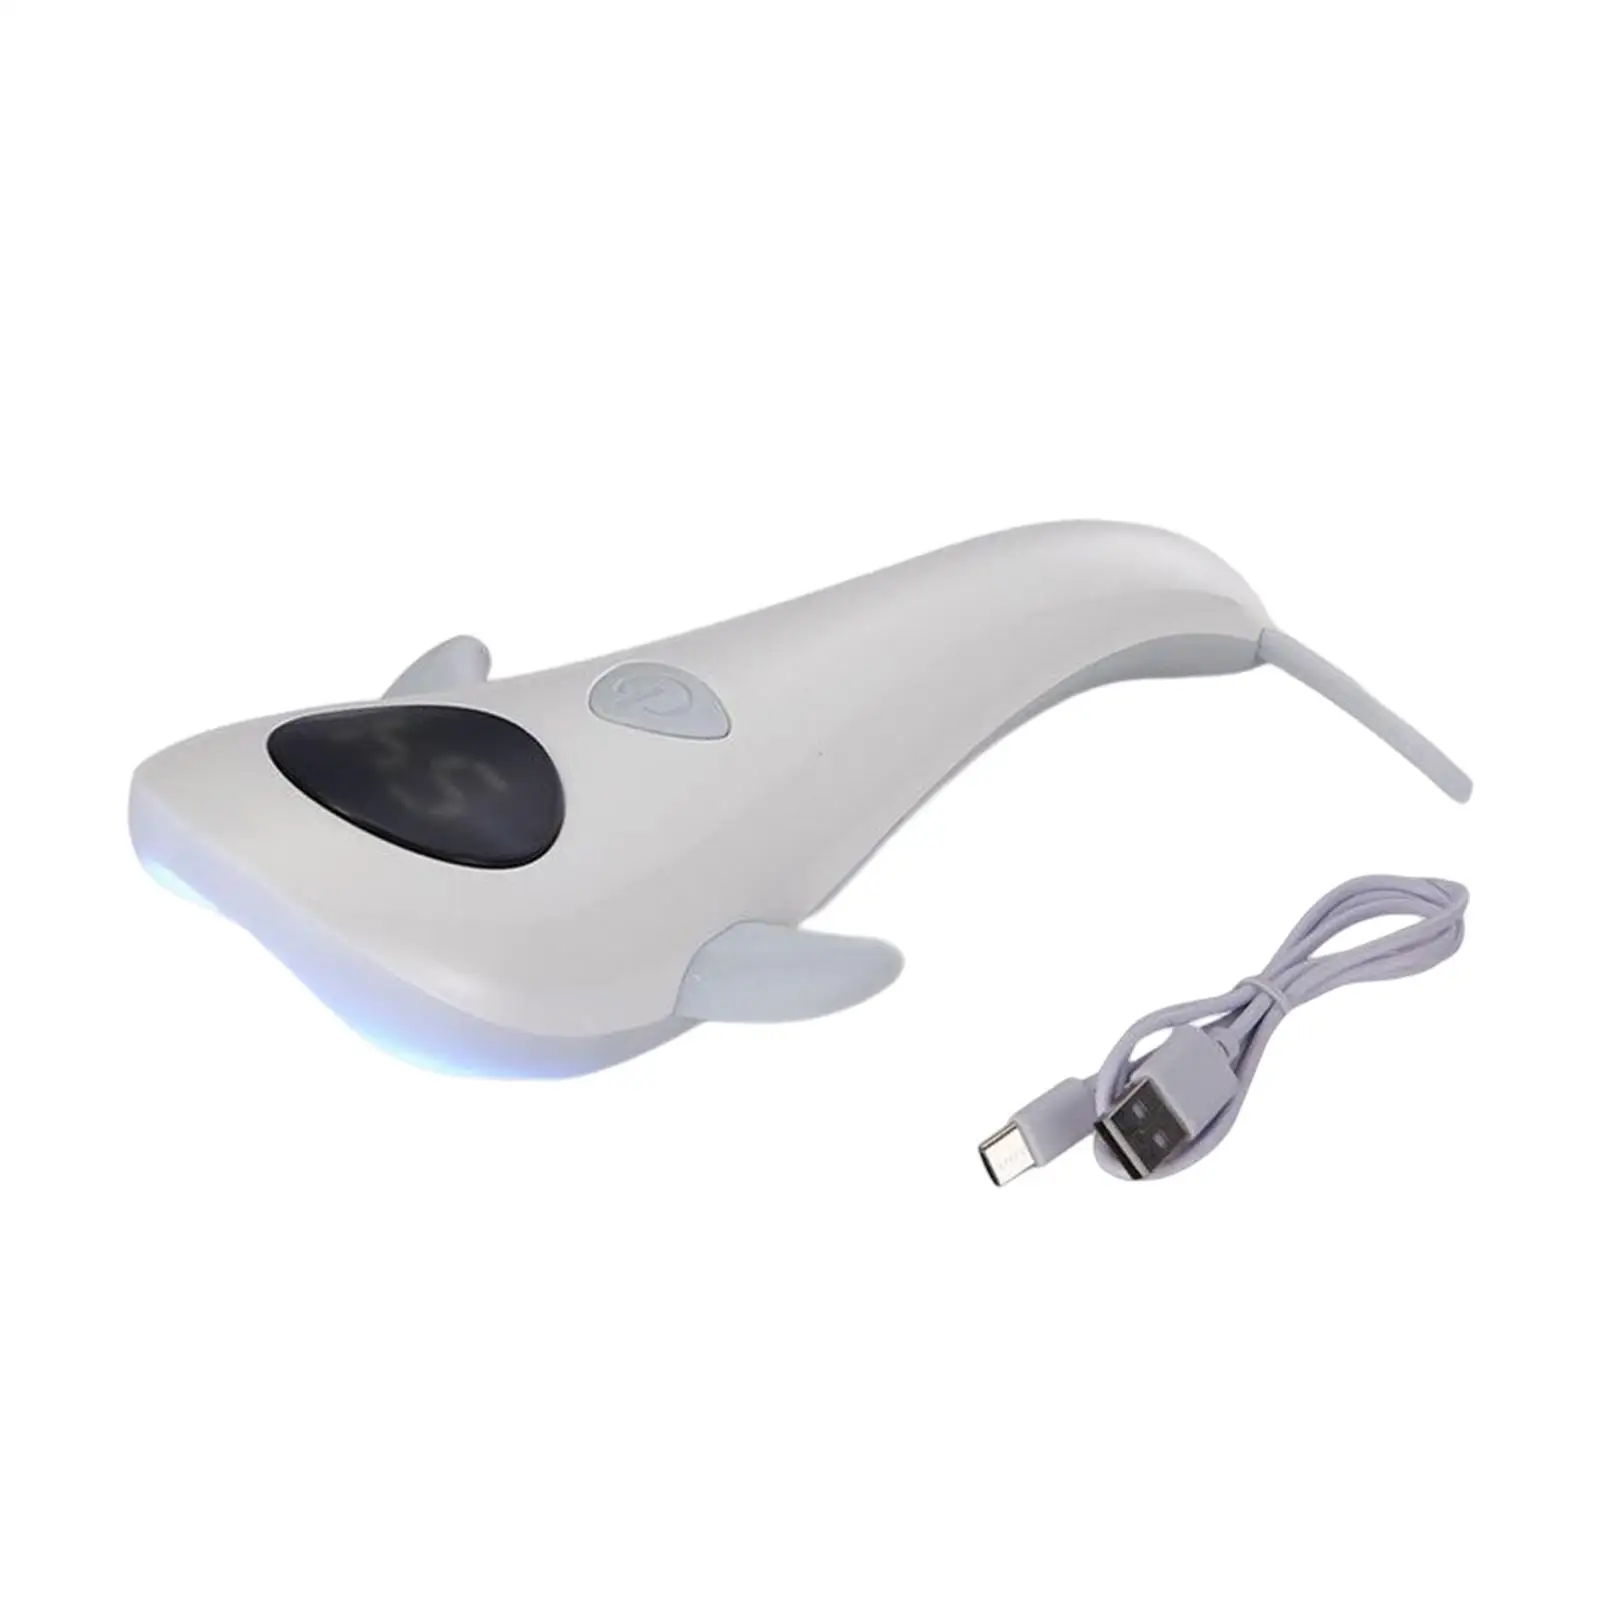 Handheld Nail Lamp Use C Manicure with 60S 90S 2 timers 5W Nail Dryer